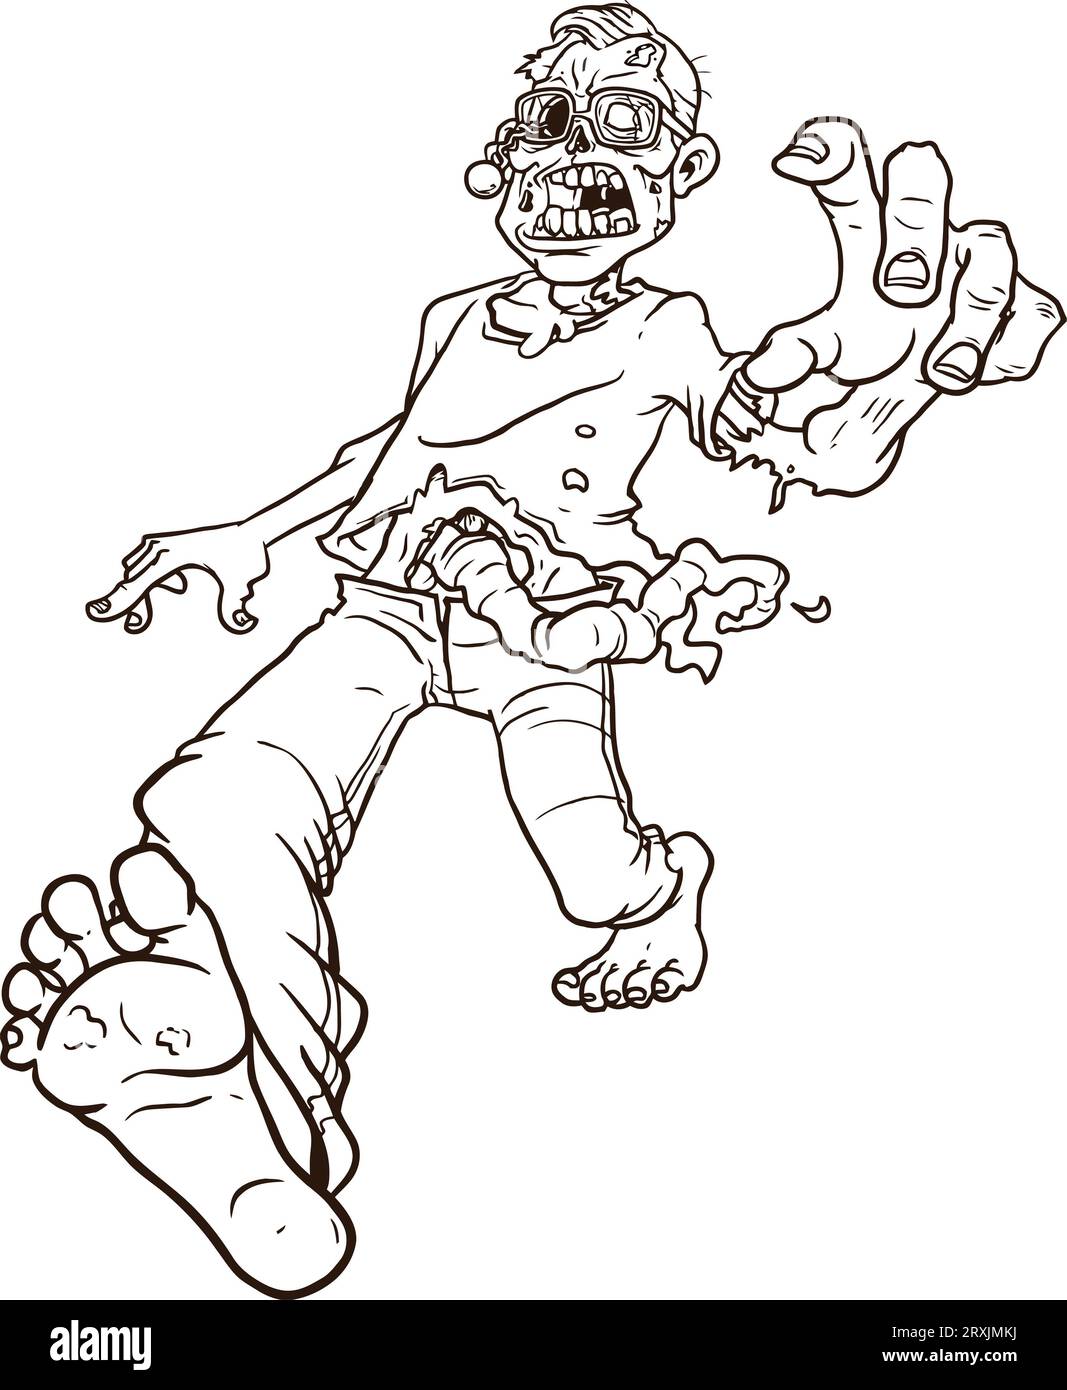 Cartoon Terrible Zombie  Coloring page Stock Photo